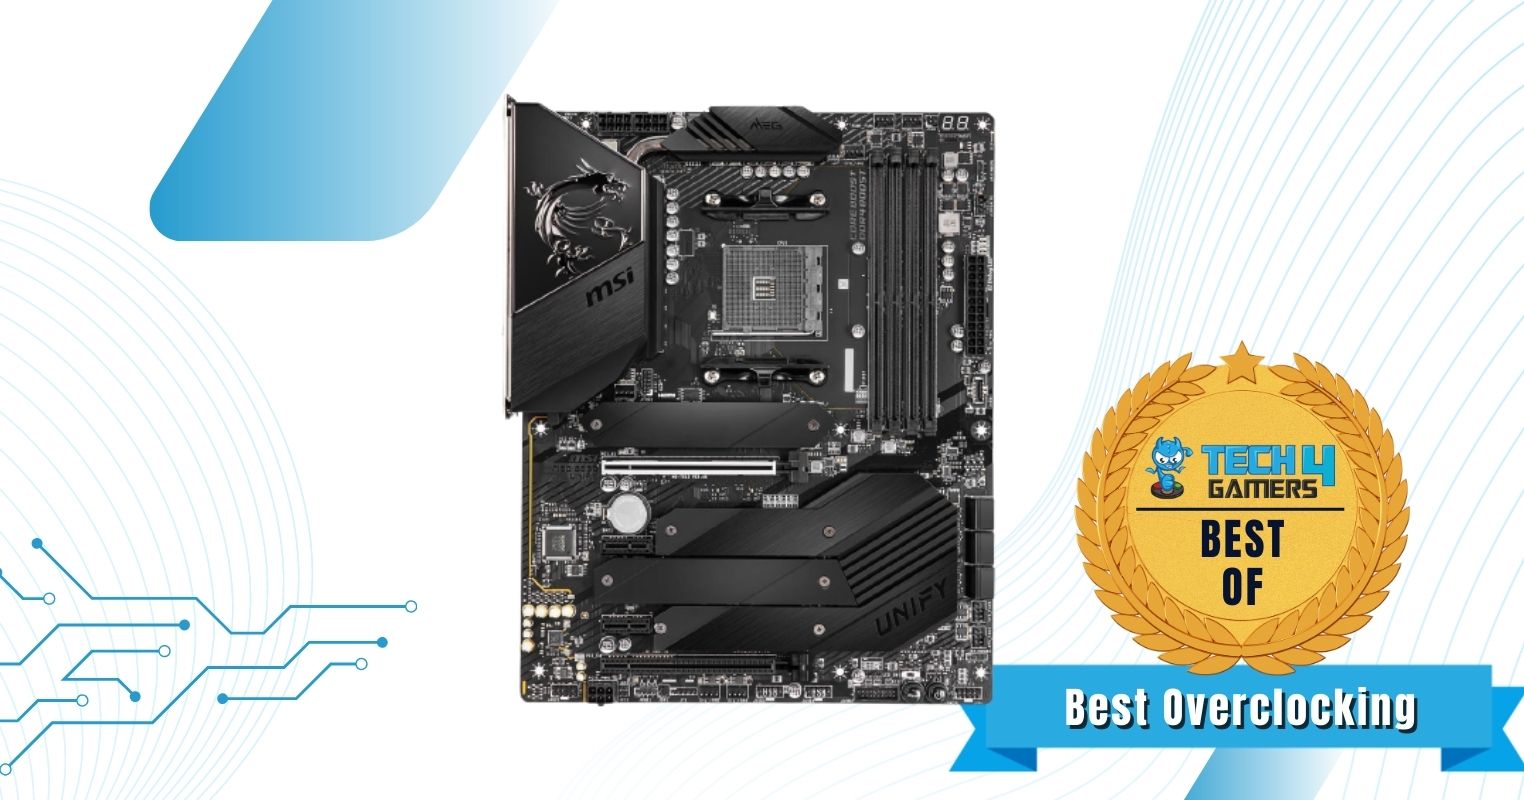 MSI MEG B550 Unify Gaming Motherboard - Best Overclocking Motherboard For Ryzen 5 5600X3D